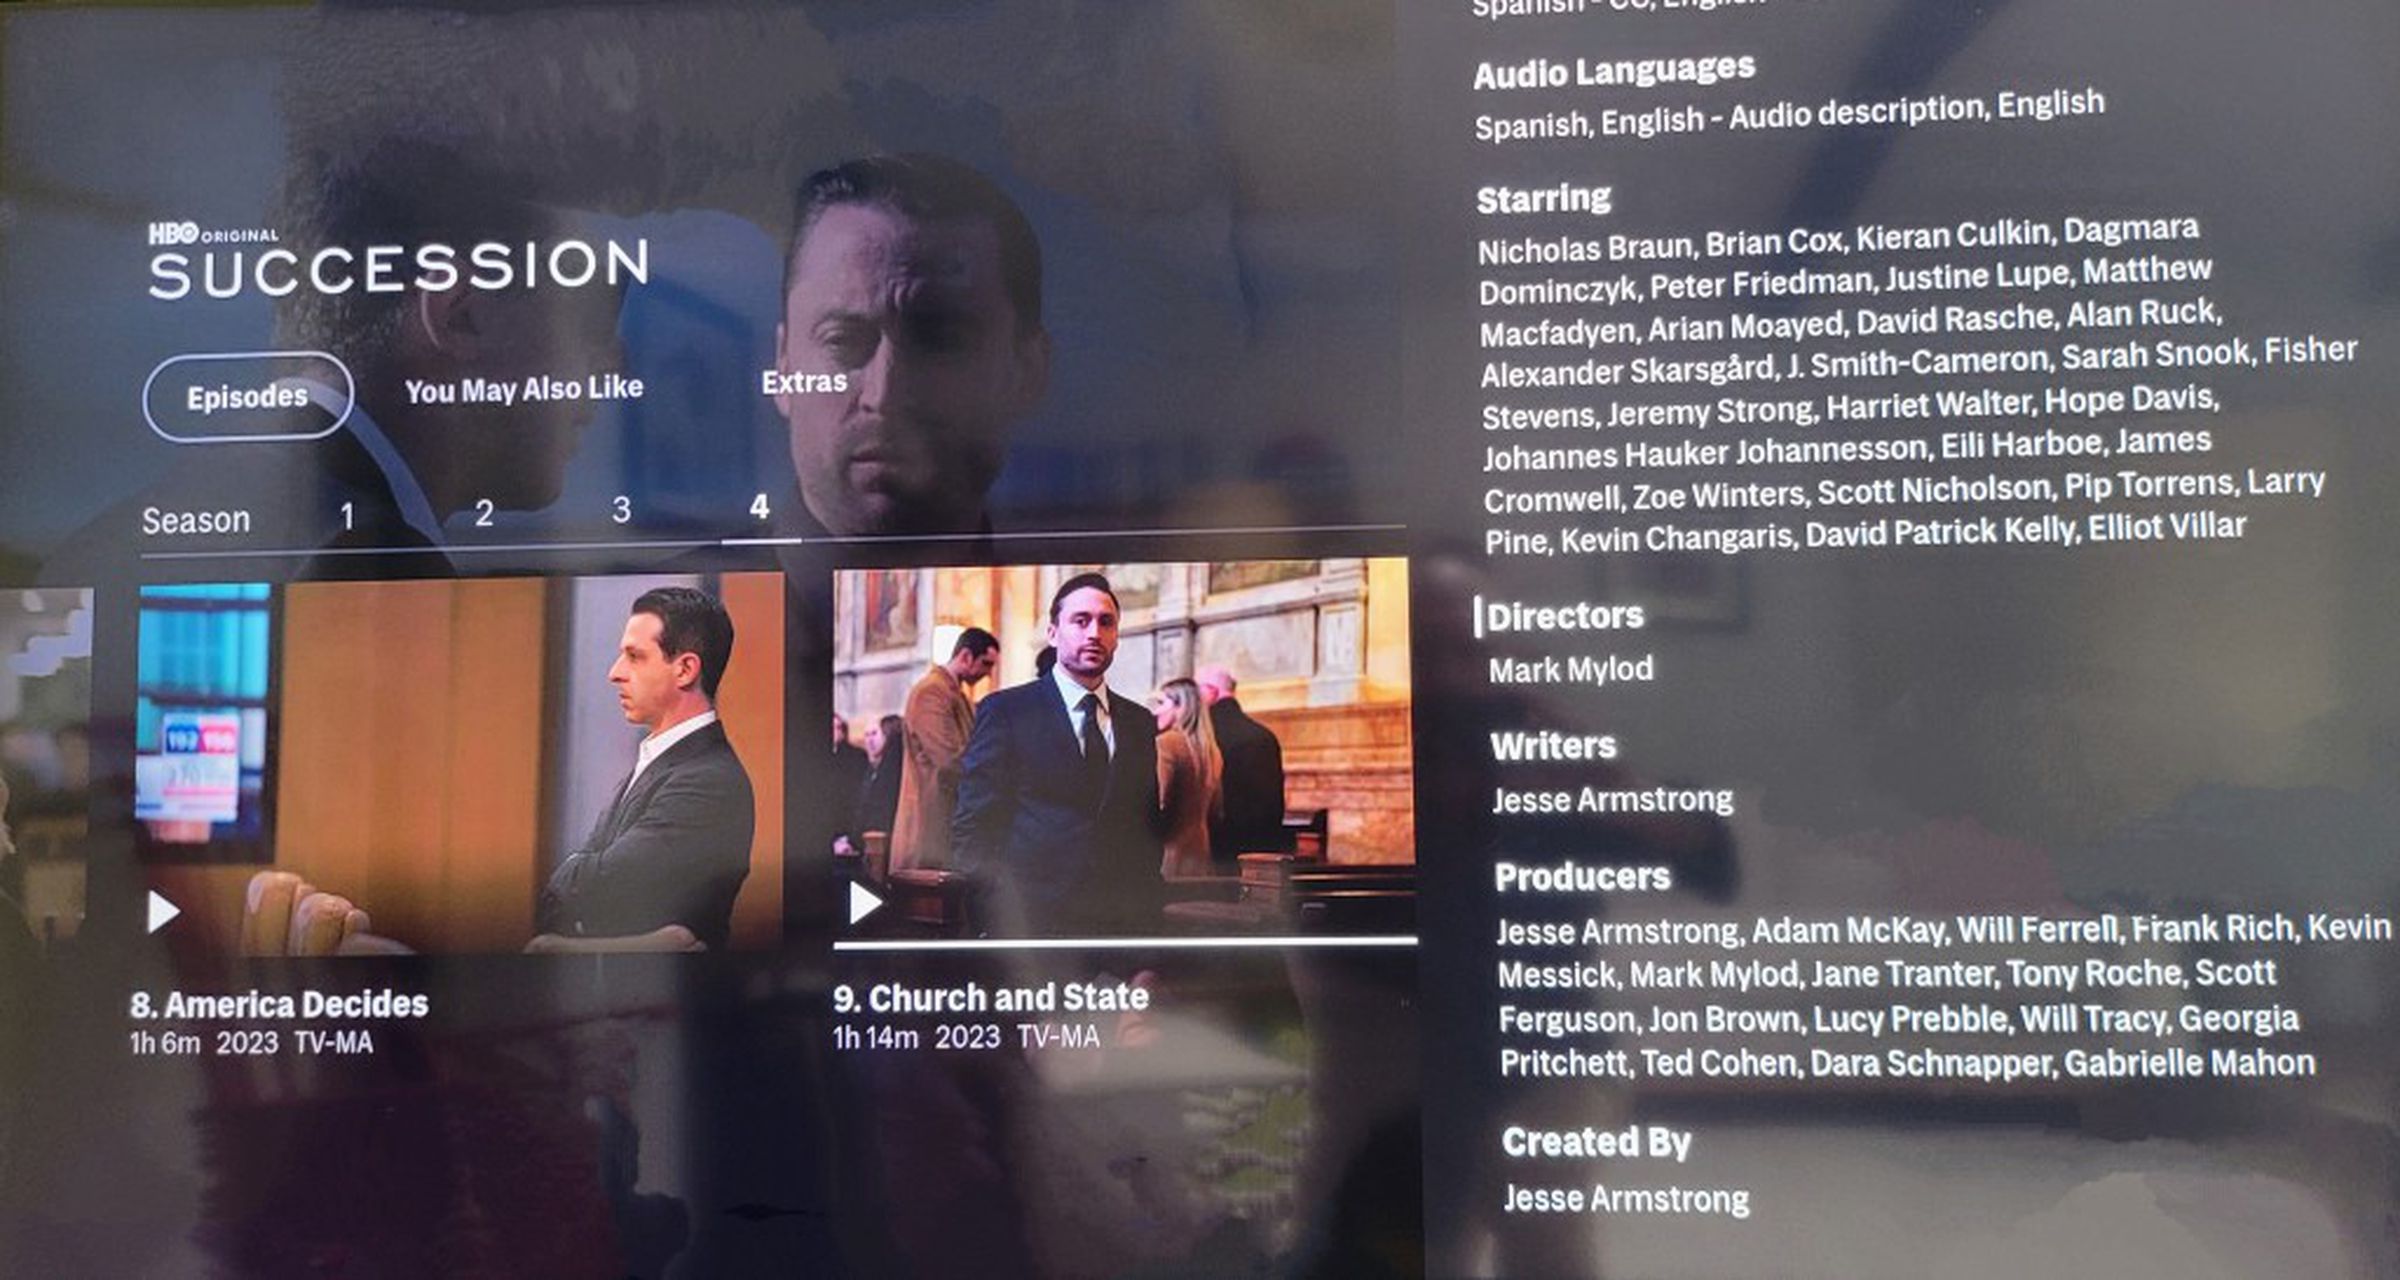 A screenshot taken of the Succession tv show credits on the Max streaming platform.